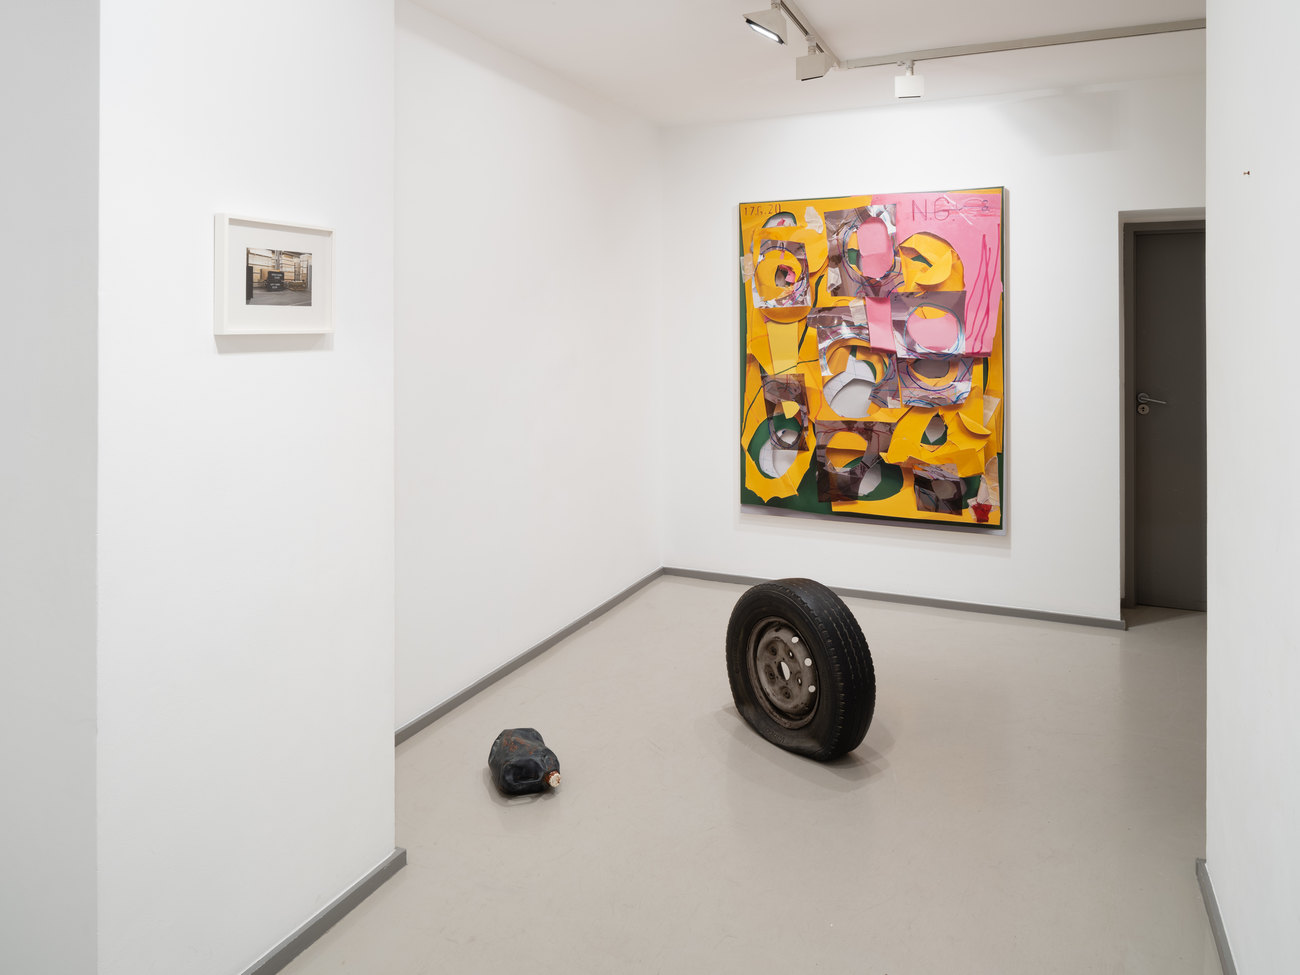 The photo shows a bright painting by Neil Gall in the background and forefront is a bronze cast flat tyre and a bronze cast oil bottle